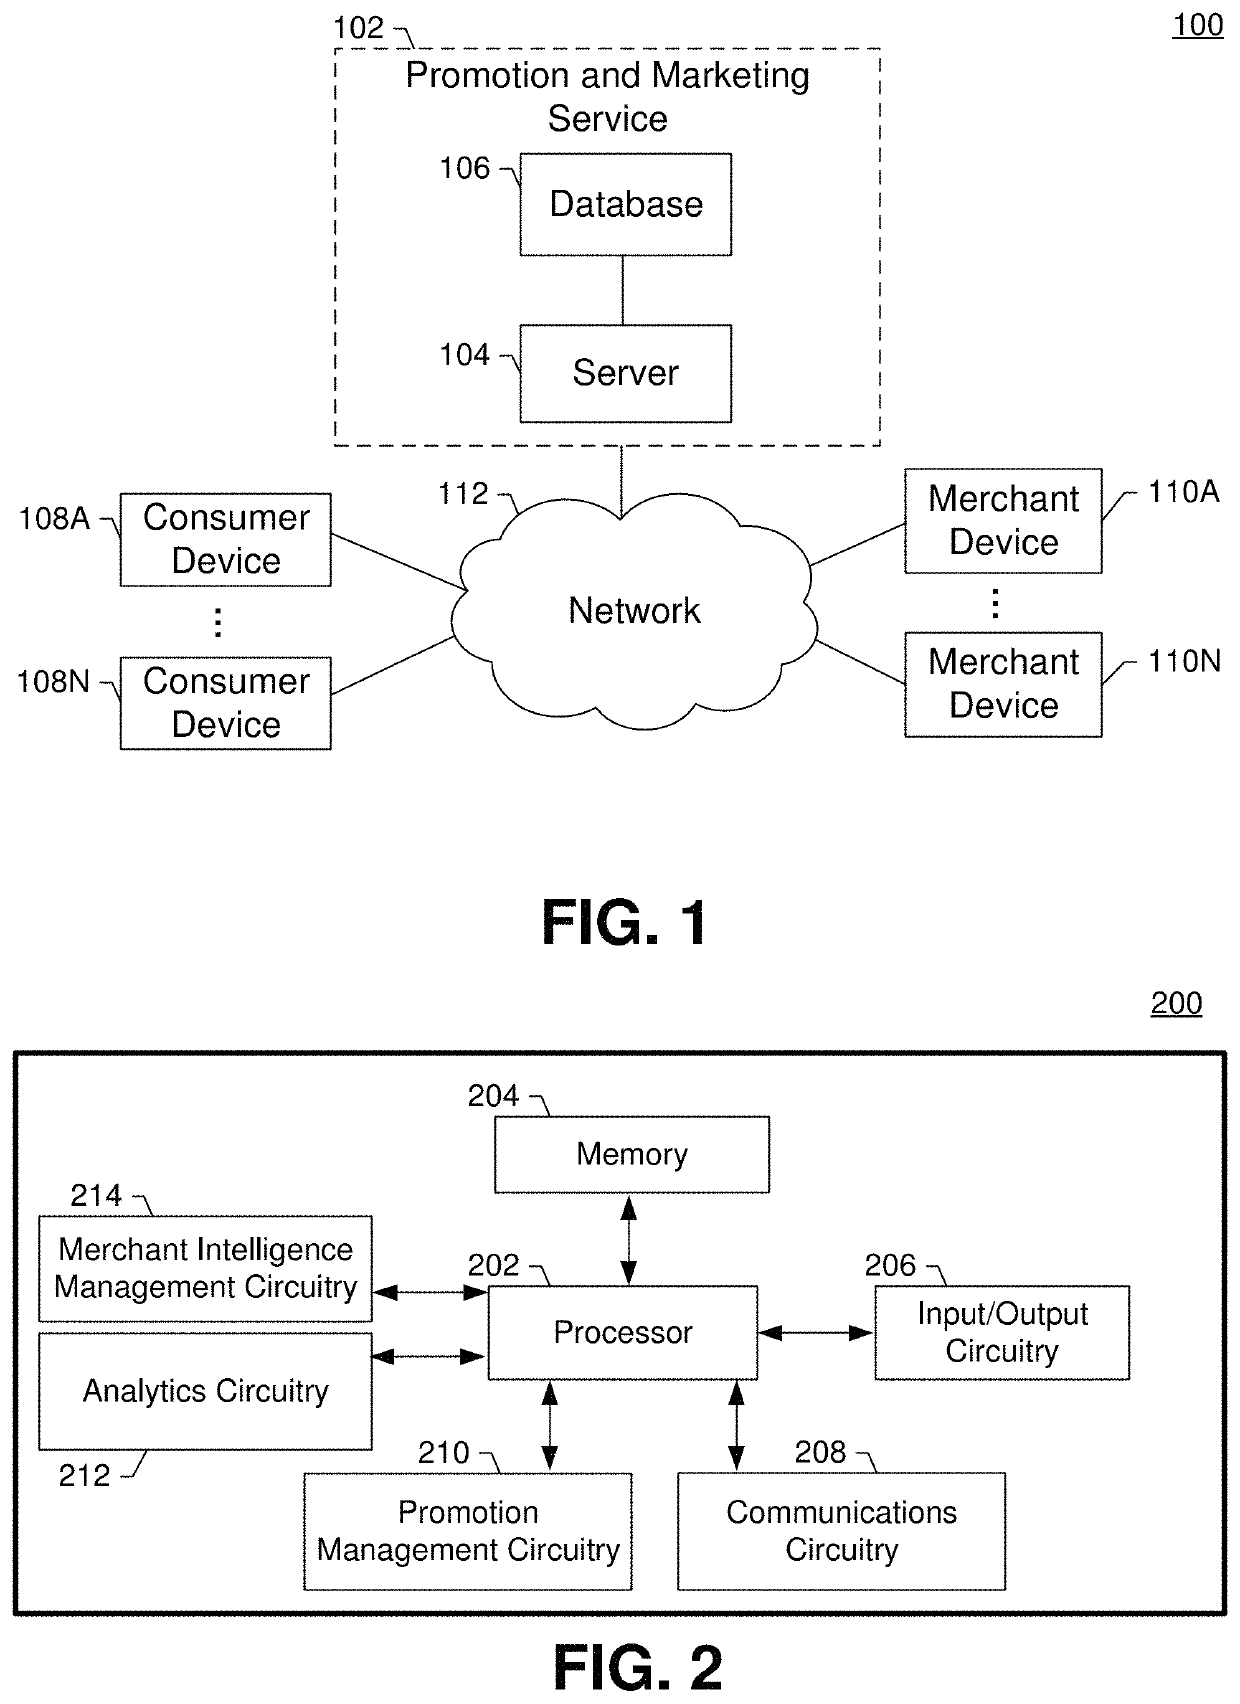 Method and apparatus for providing automated market analysis testing